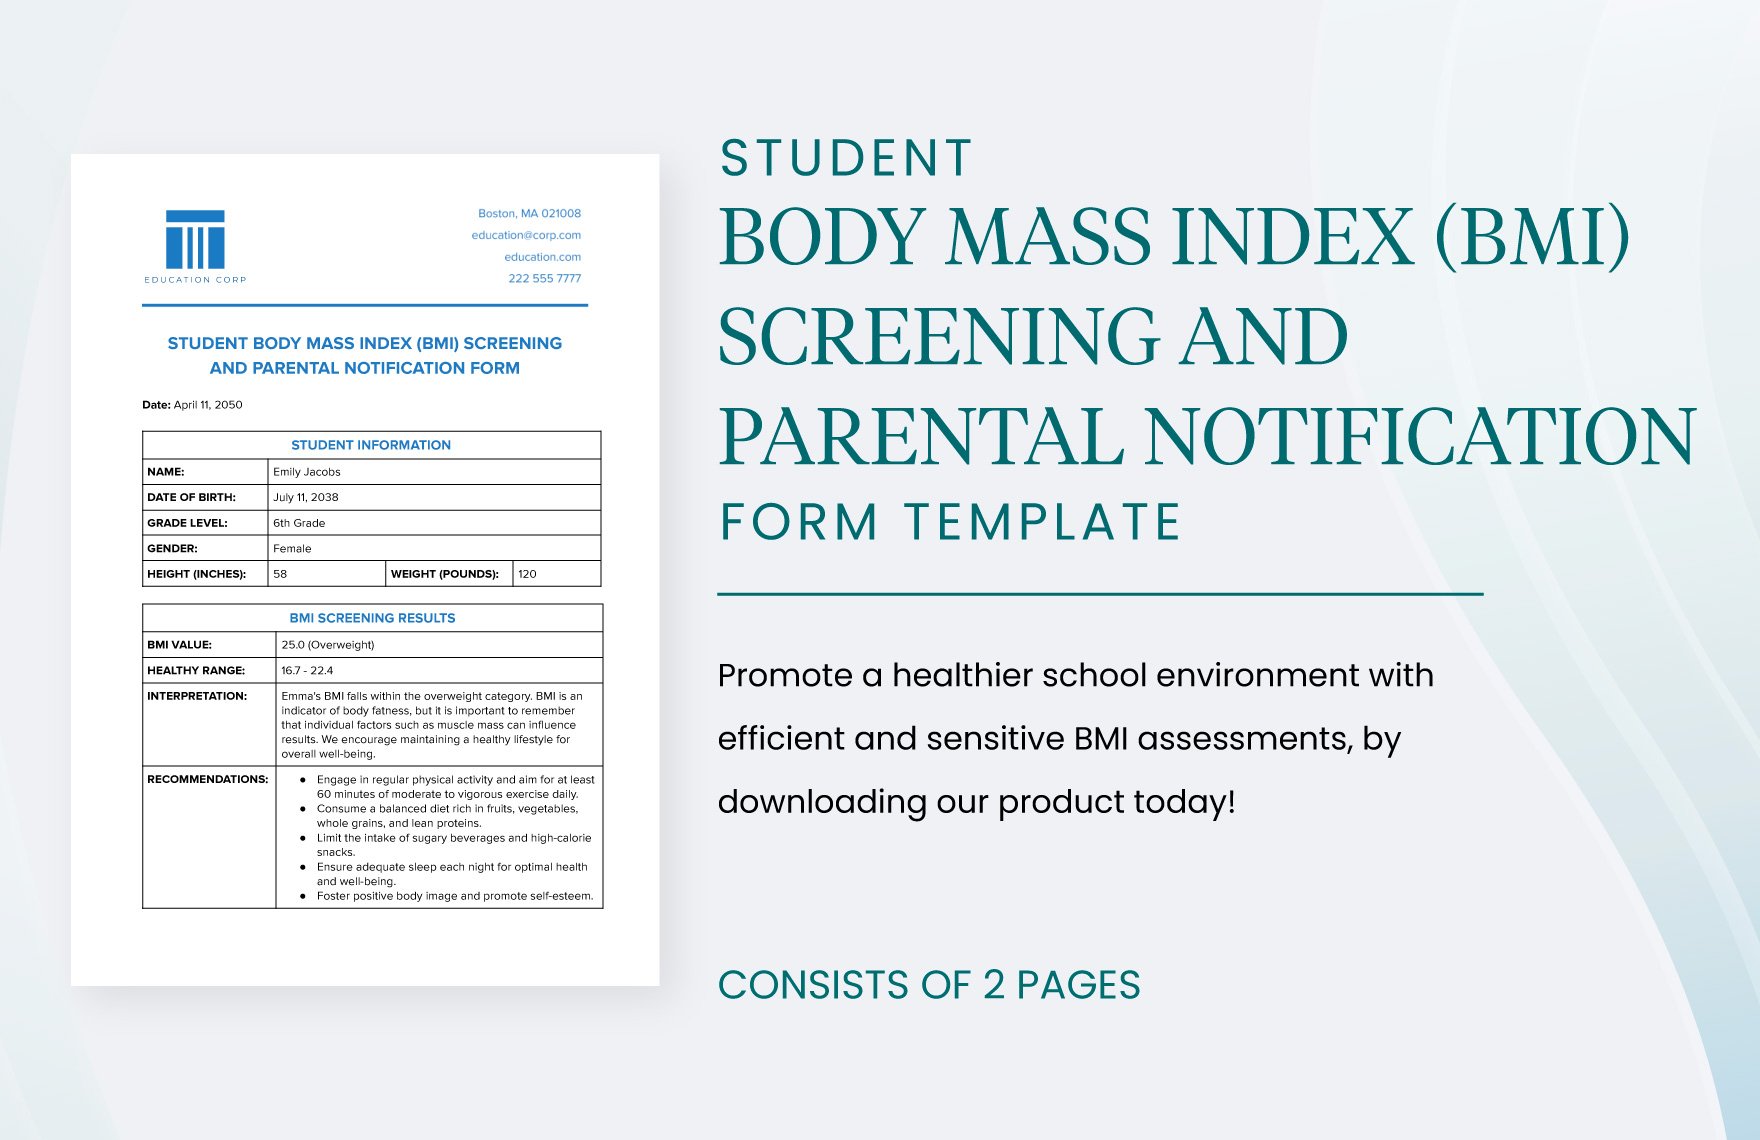 Student Body Mass Index (BMI) Screening and Parental Notification Form Template